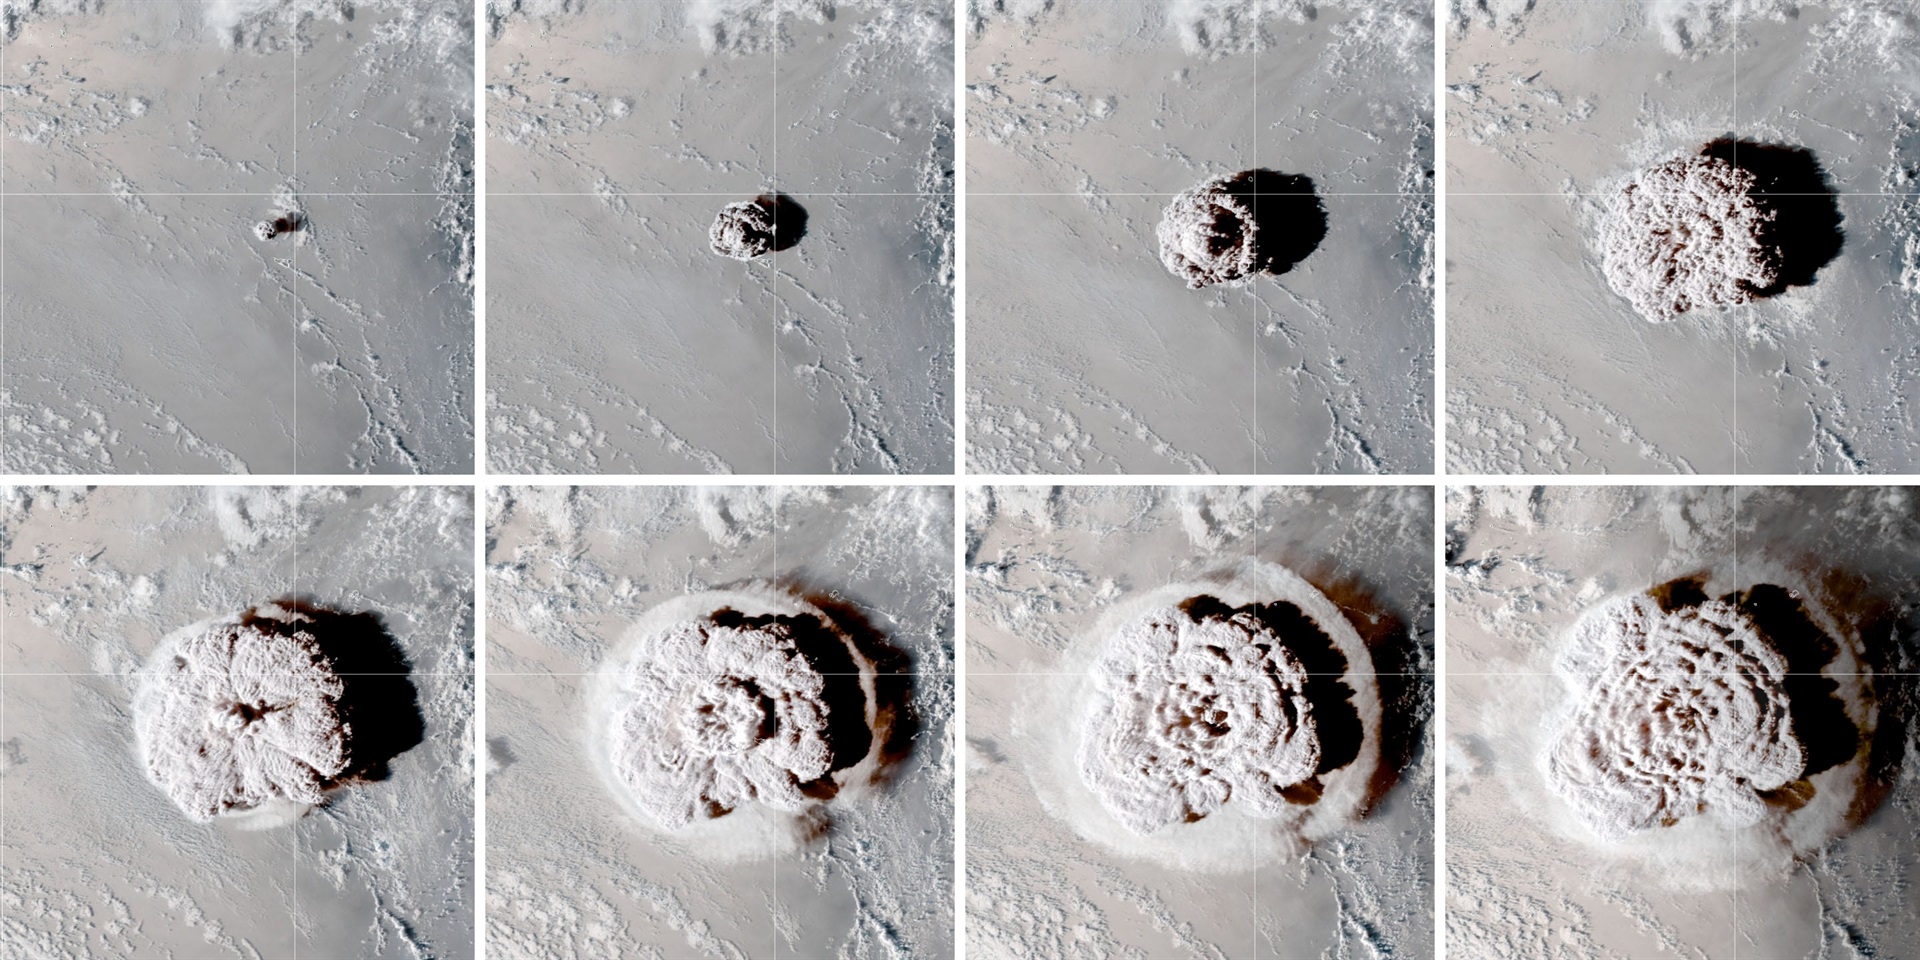 A sequence of still images from the GOES-17 satellite shows the Tonga plume at various stages on January 15, 2022.